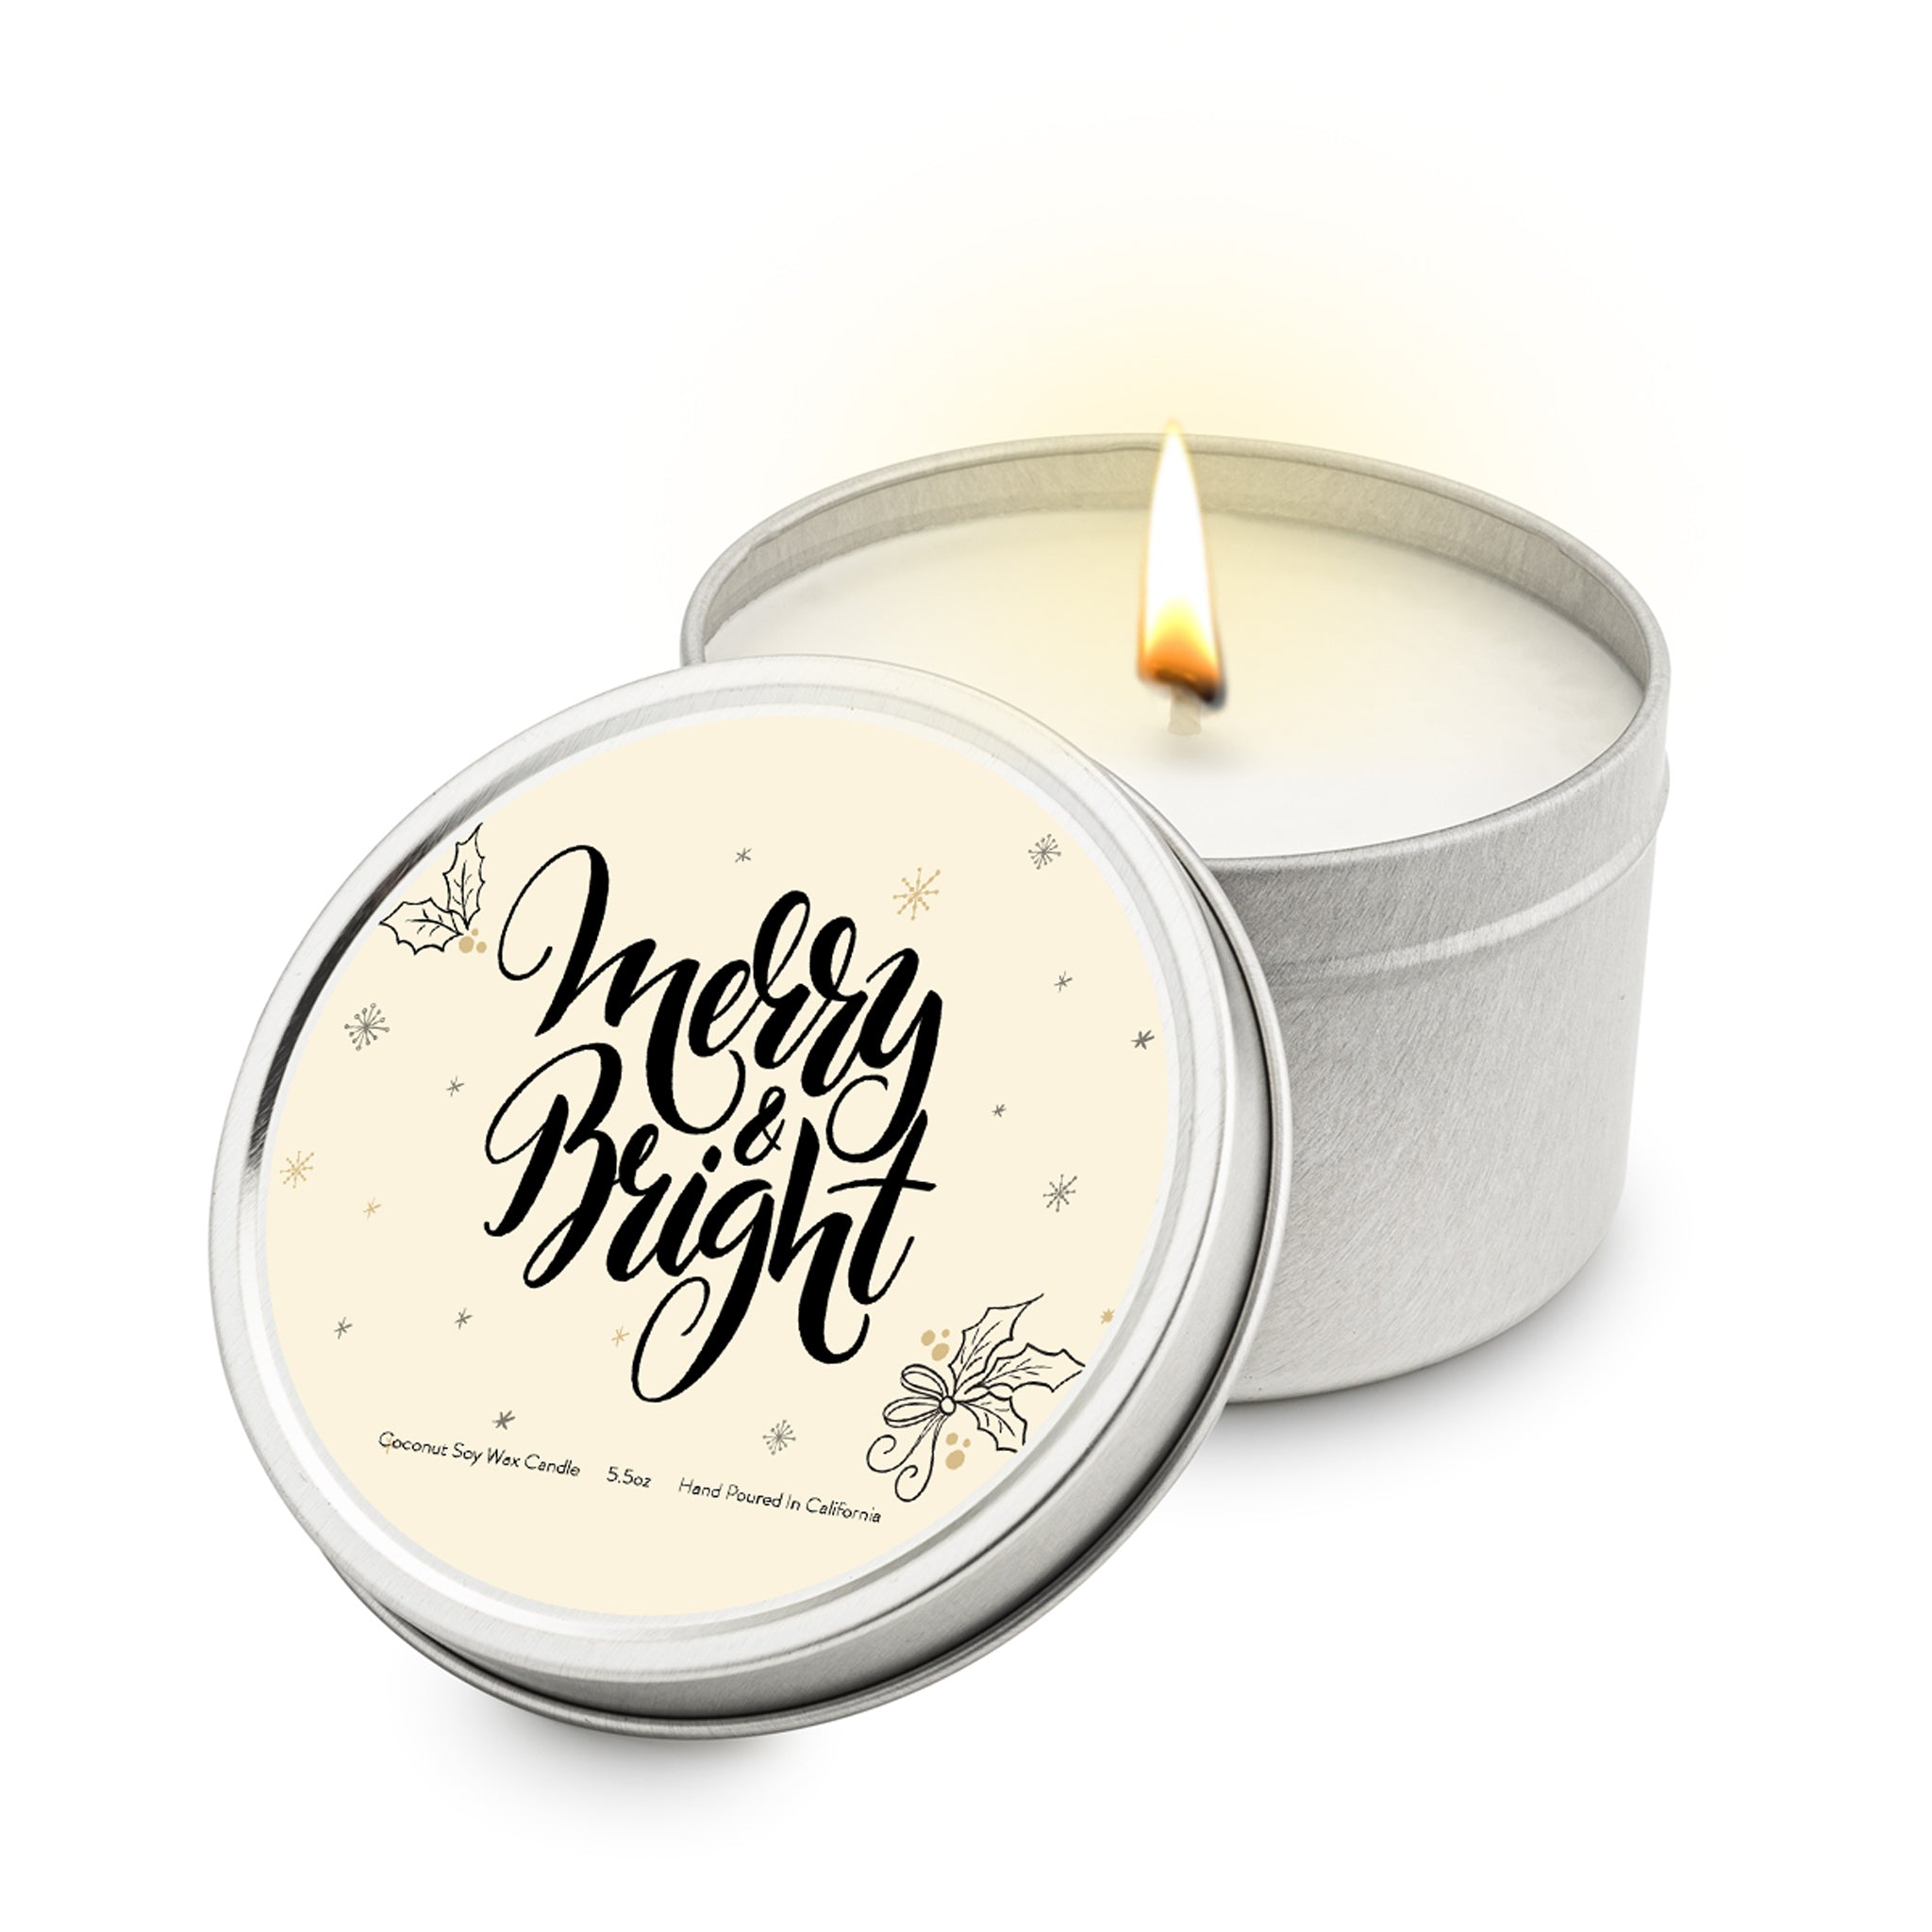 Merry & Bright 5.5 oz Soy Blend Travel Candle Tin